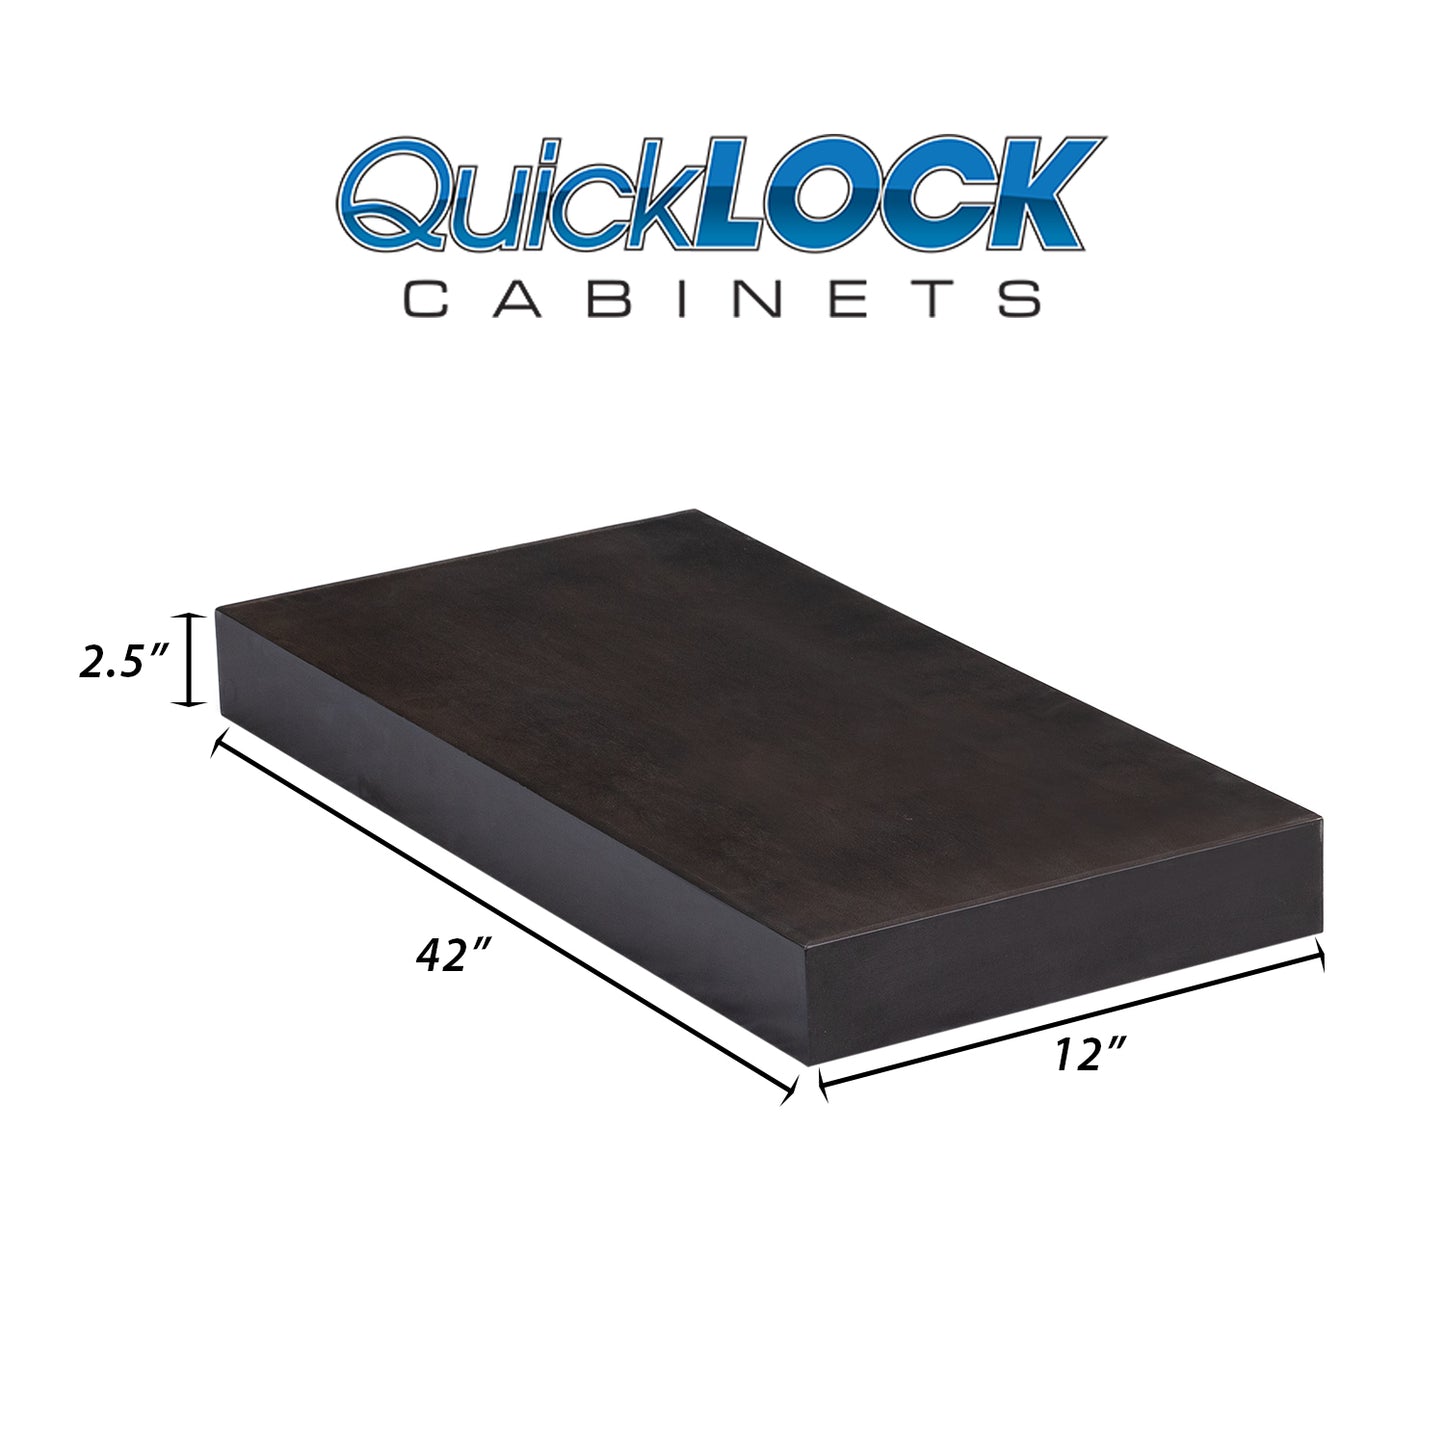 Quicklock Cabinets Floating Shelves | 2.5" Thick | Espresso Stain, 12" D x 42" W x 2.5" H | American Made | Hardwood Bracket | Complete Shelf Unit